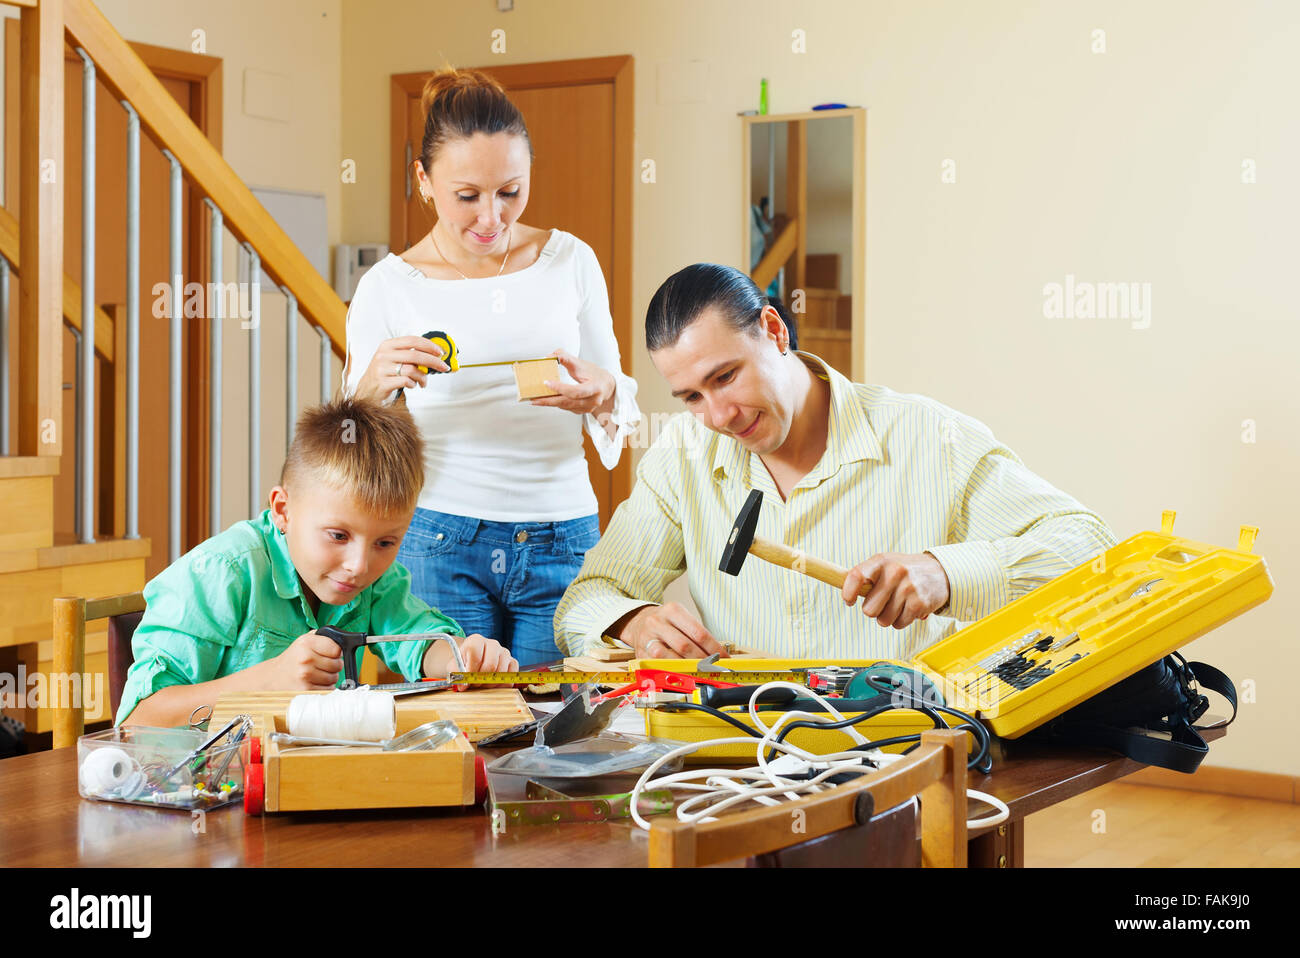 Father and son are doing with their hands crafts in home, woman helps them Stock Photo